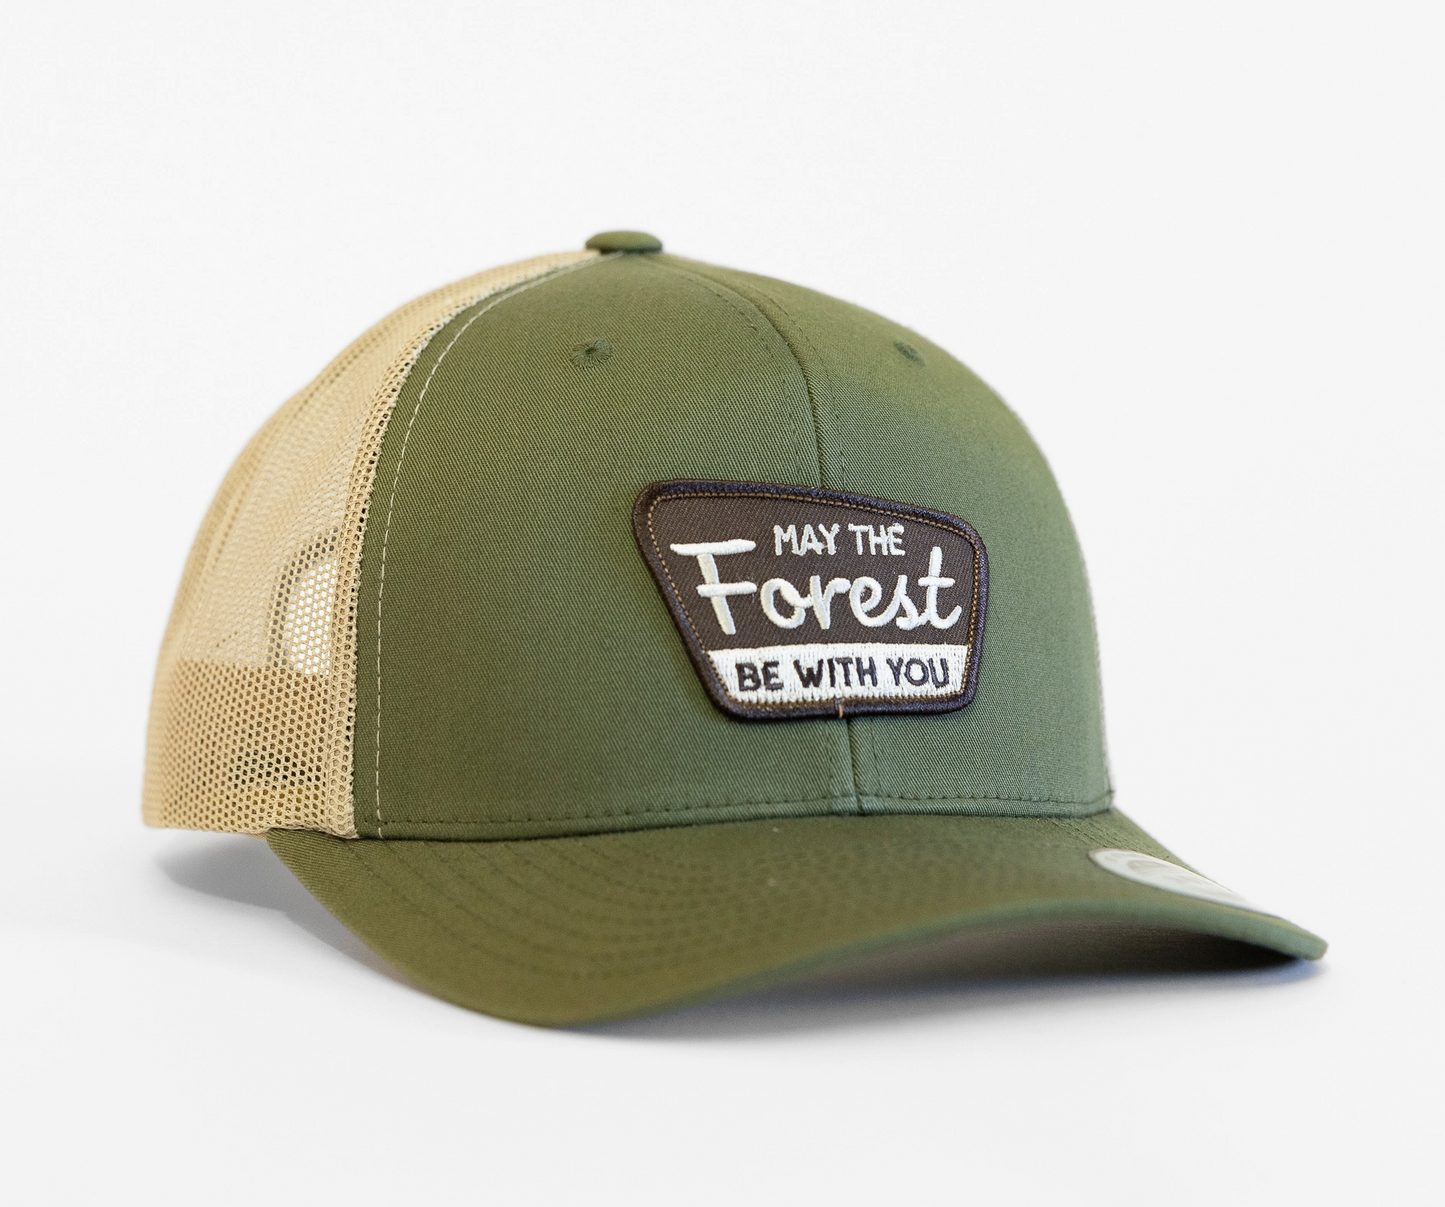 May the Forest Be with You Mesh Trucker Hat